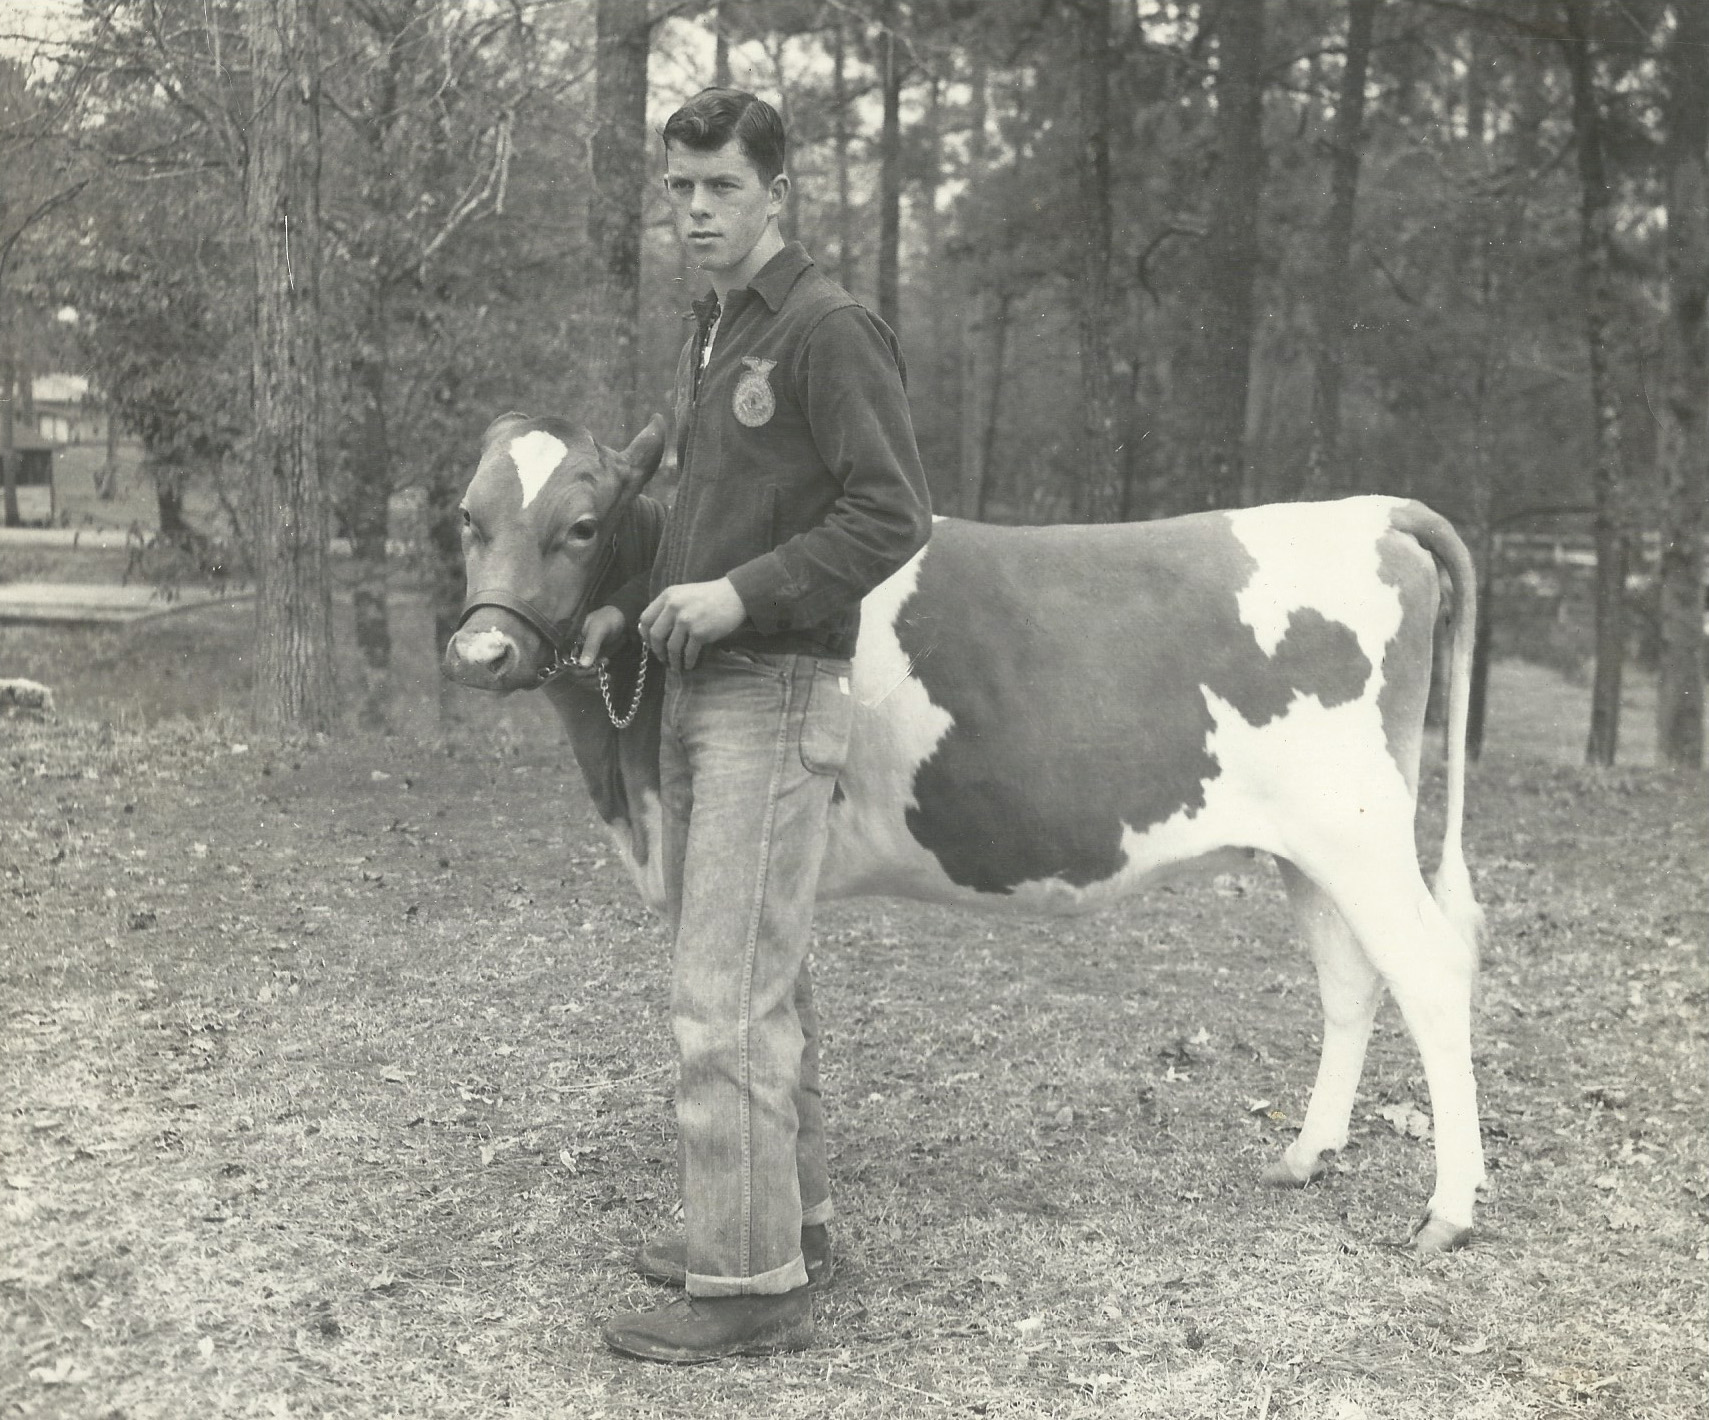  My father, Walter Smith as a teenager around 1957 showing a calf. 